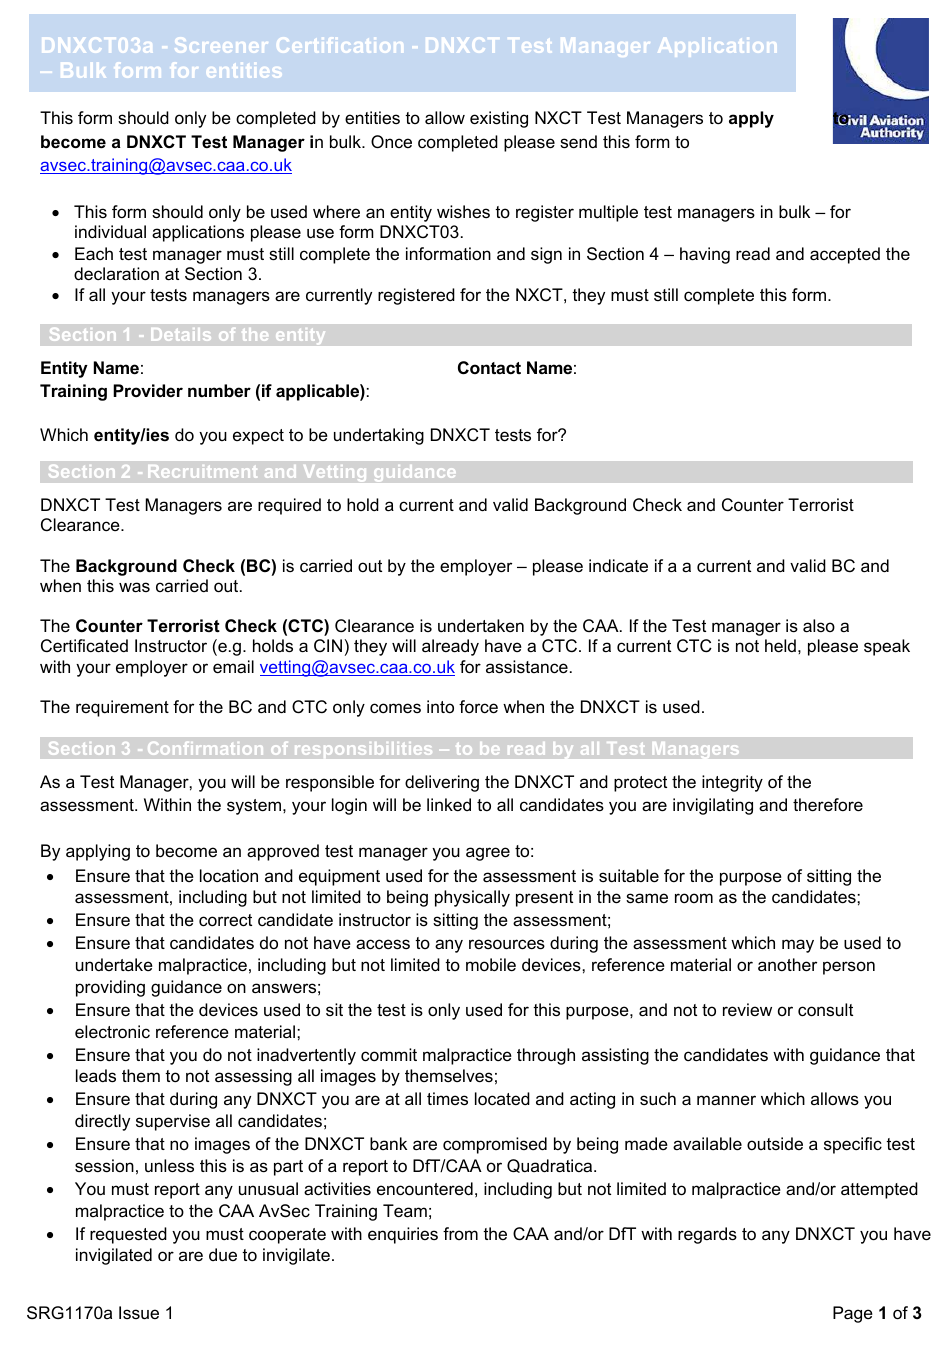 Form SRG1170A Screener Certification - Dnxct Test Manager Application - Bulk Form for Entities - United Kingdom, Page 1